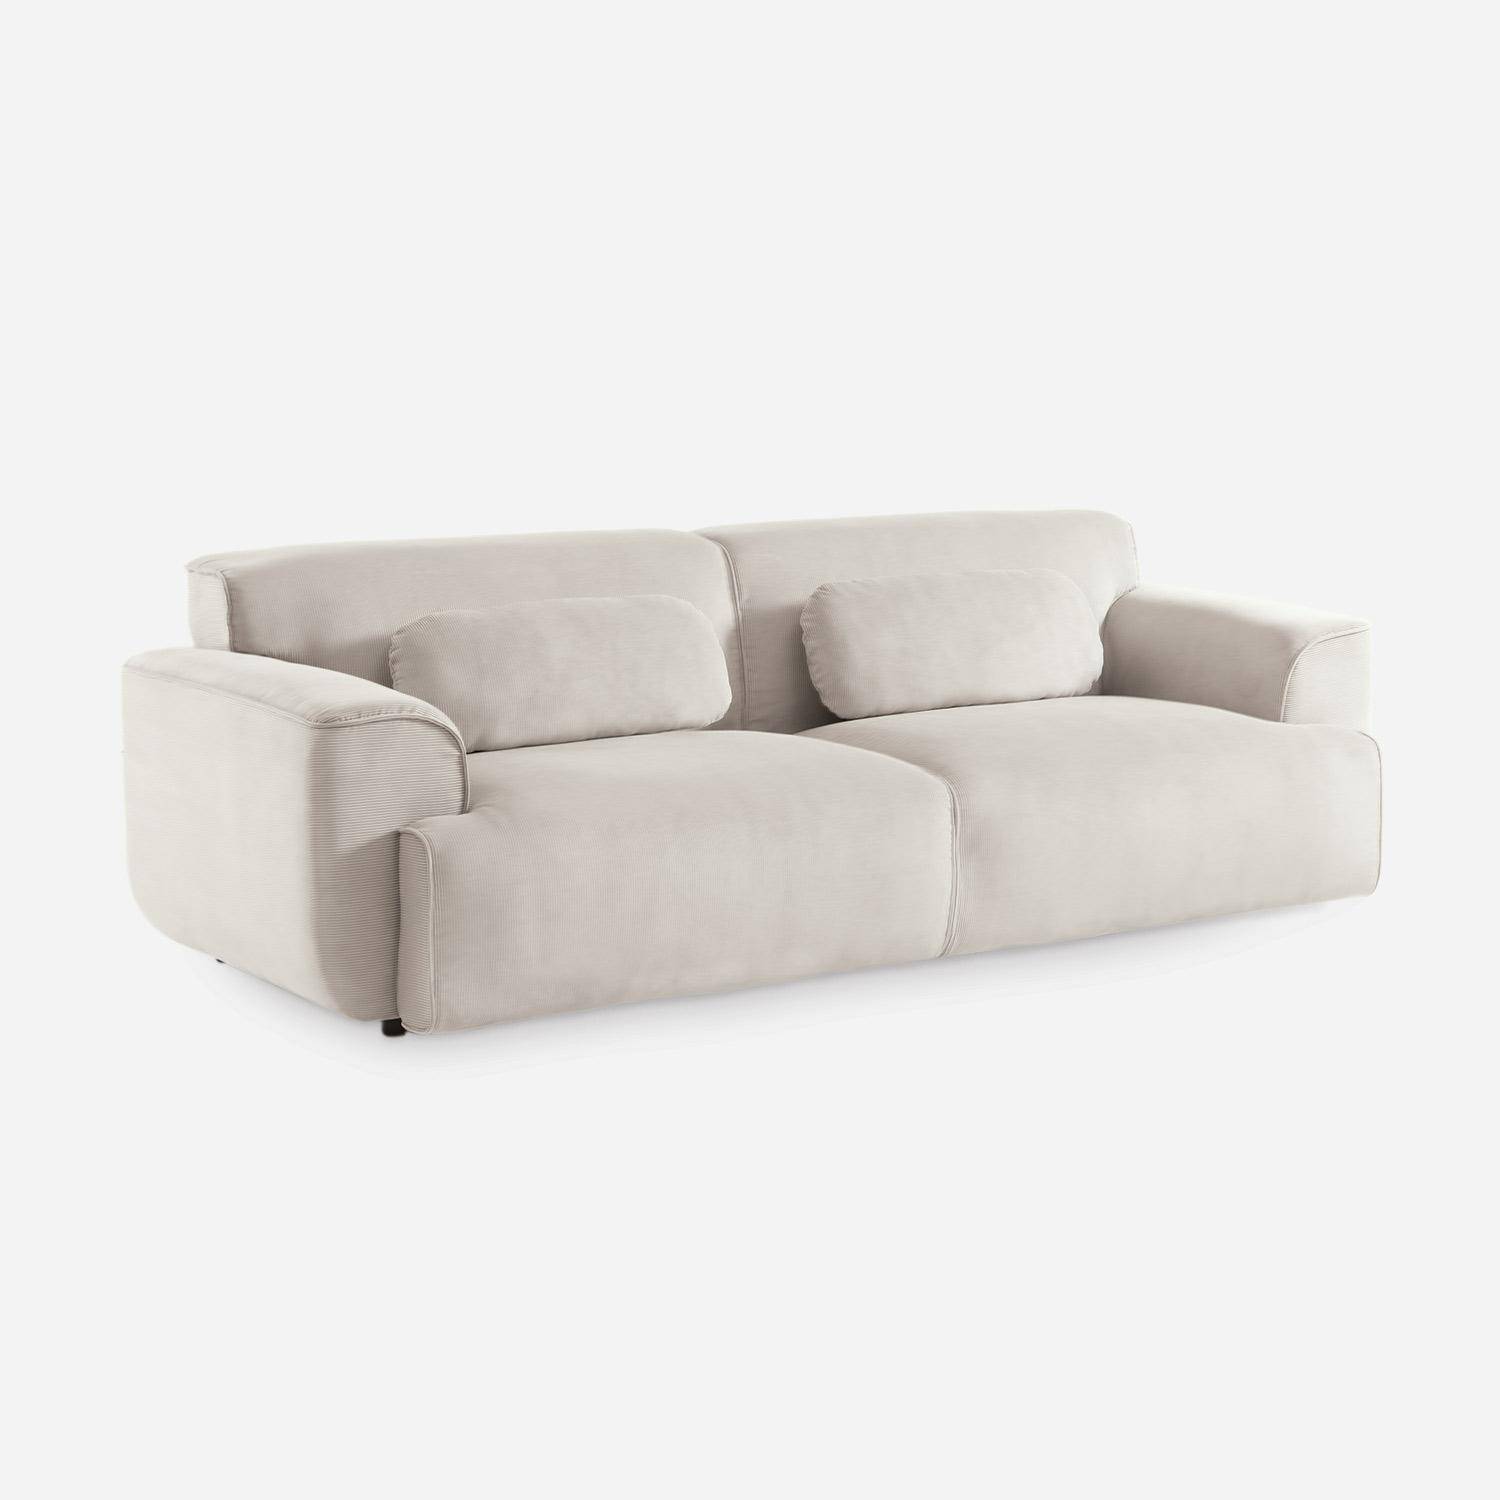  3-Seater corduroy velvet Sofa 230cm, deep seat, cushions provided and removable, beige,sweeek,Photo5